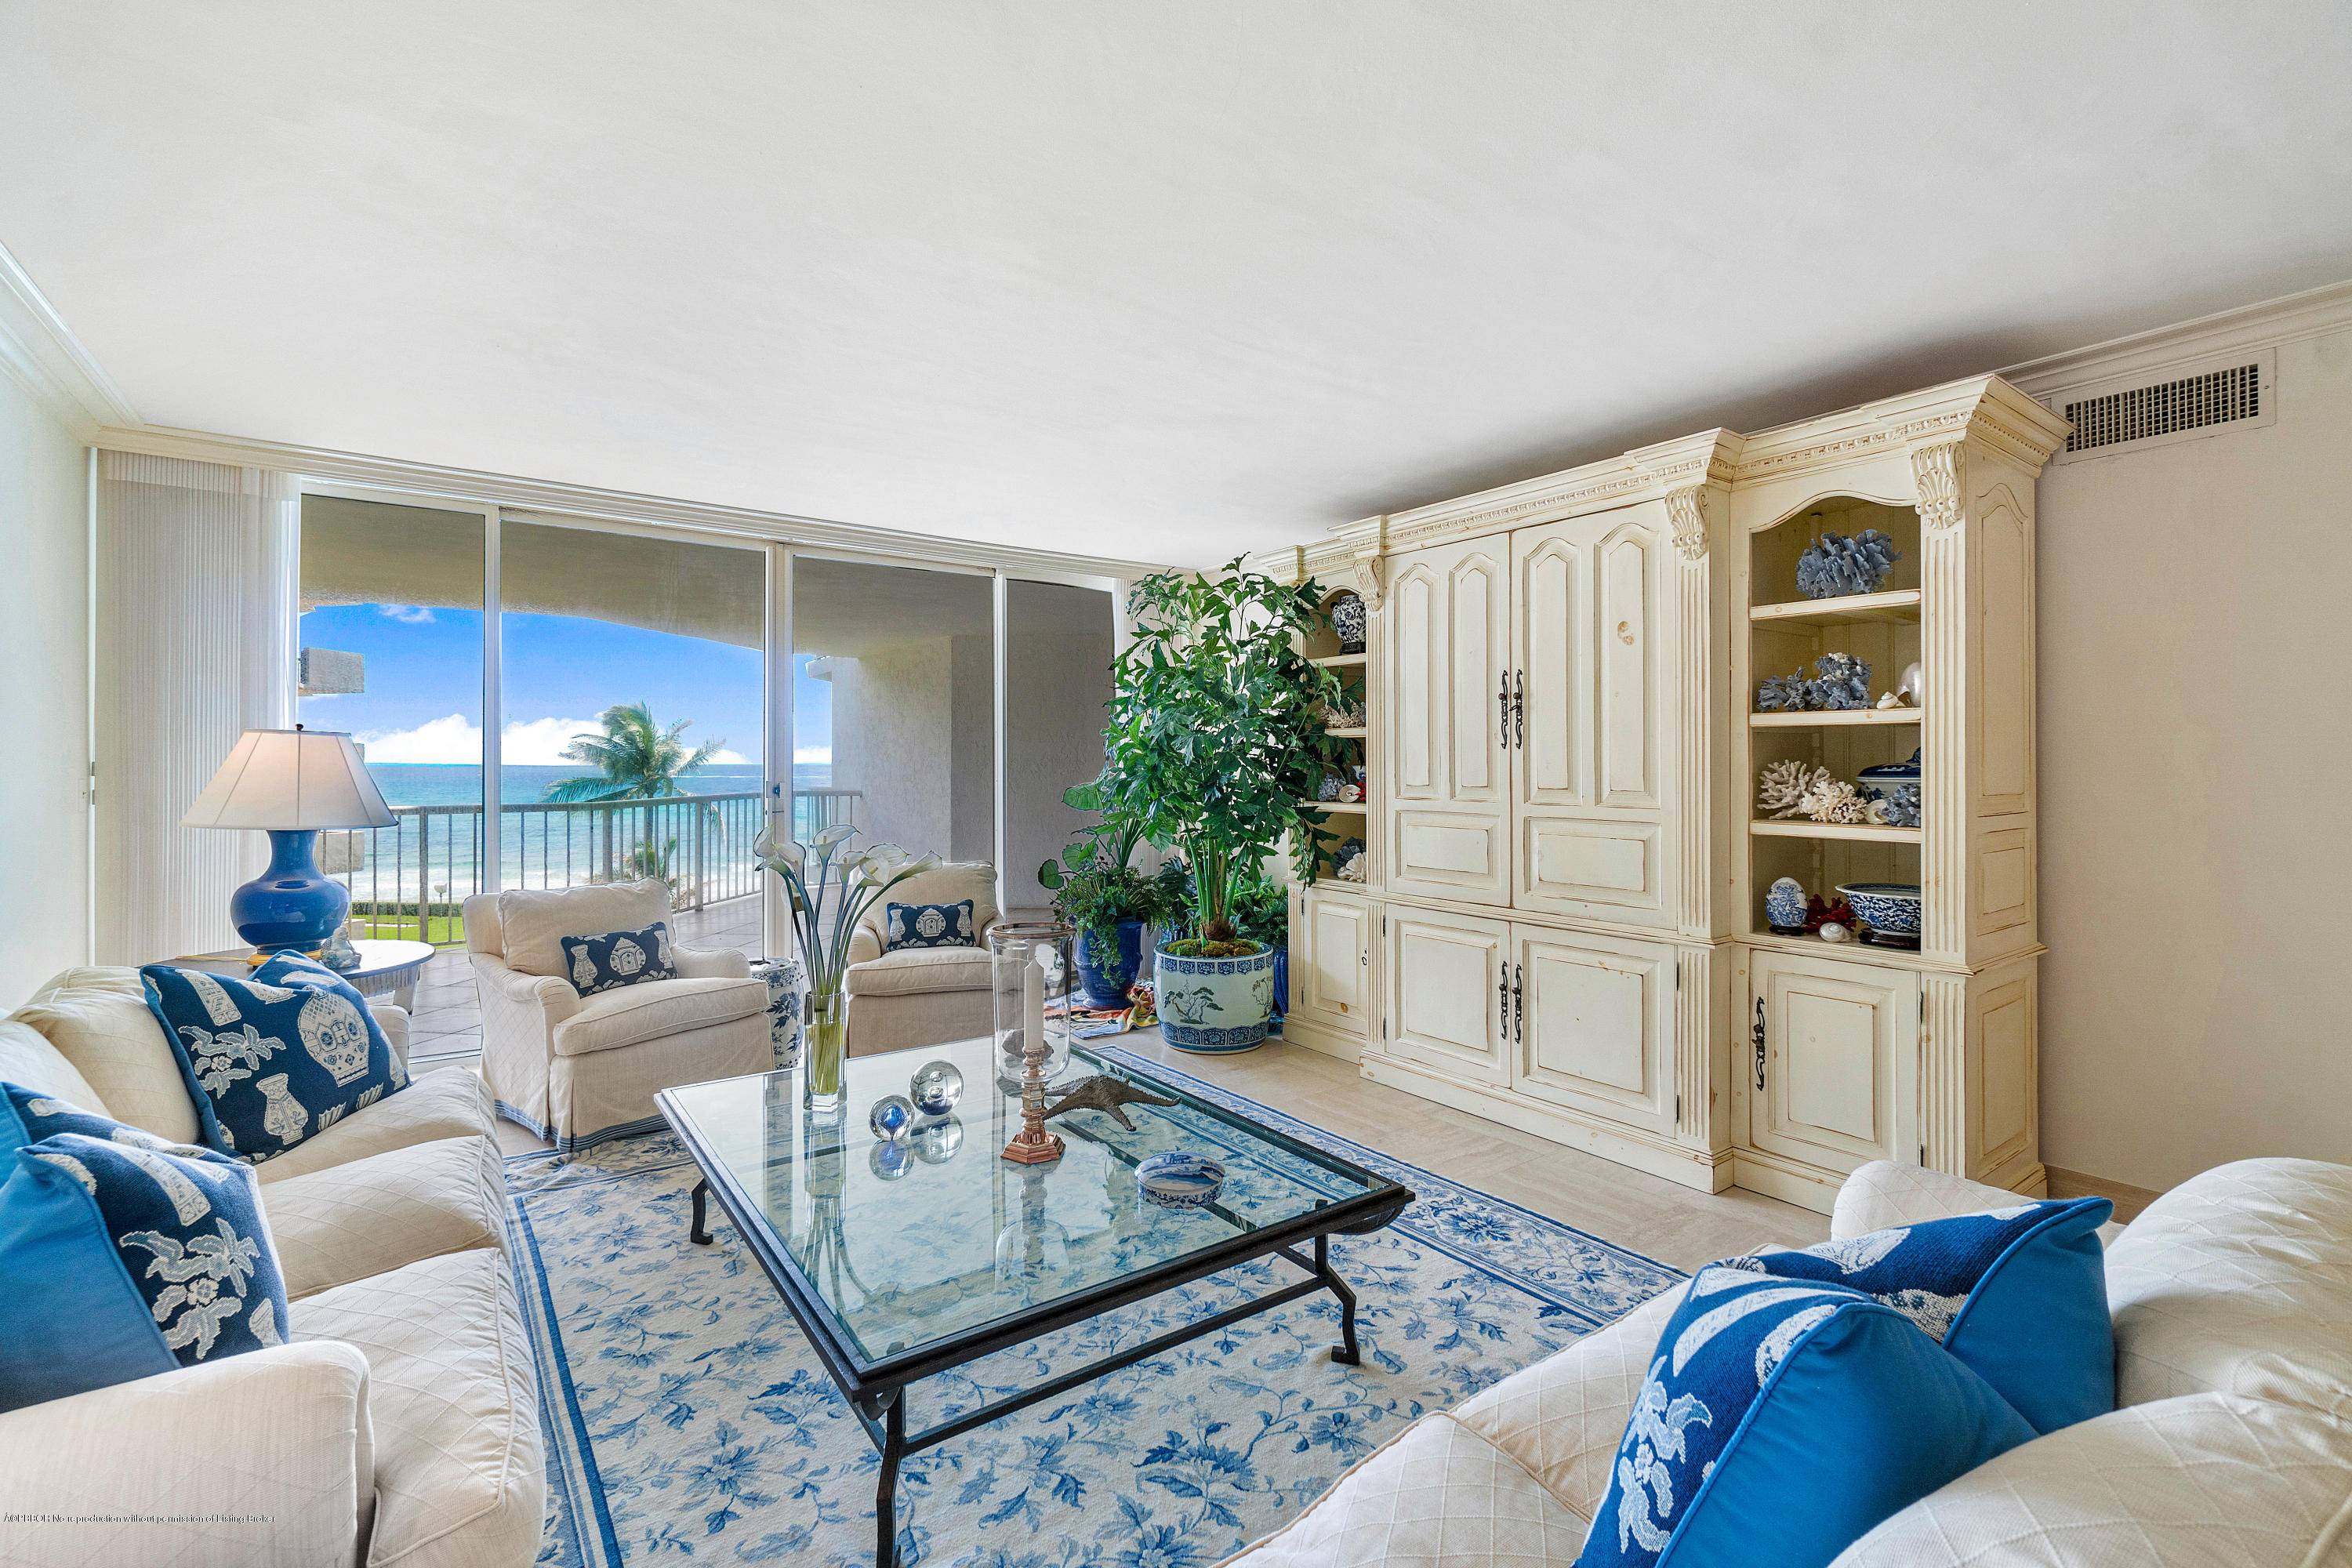 Lovely Ocean views from this desirable spacious 2 bedroom, 2 bathroom apartment in the luxurious Enclave of Palm Beach.